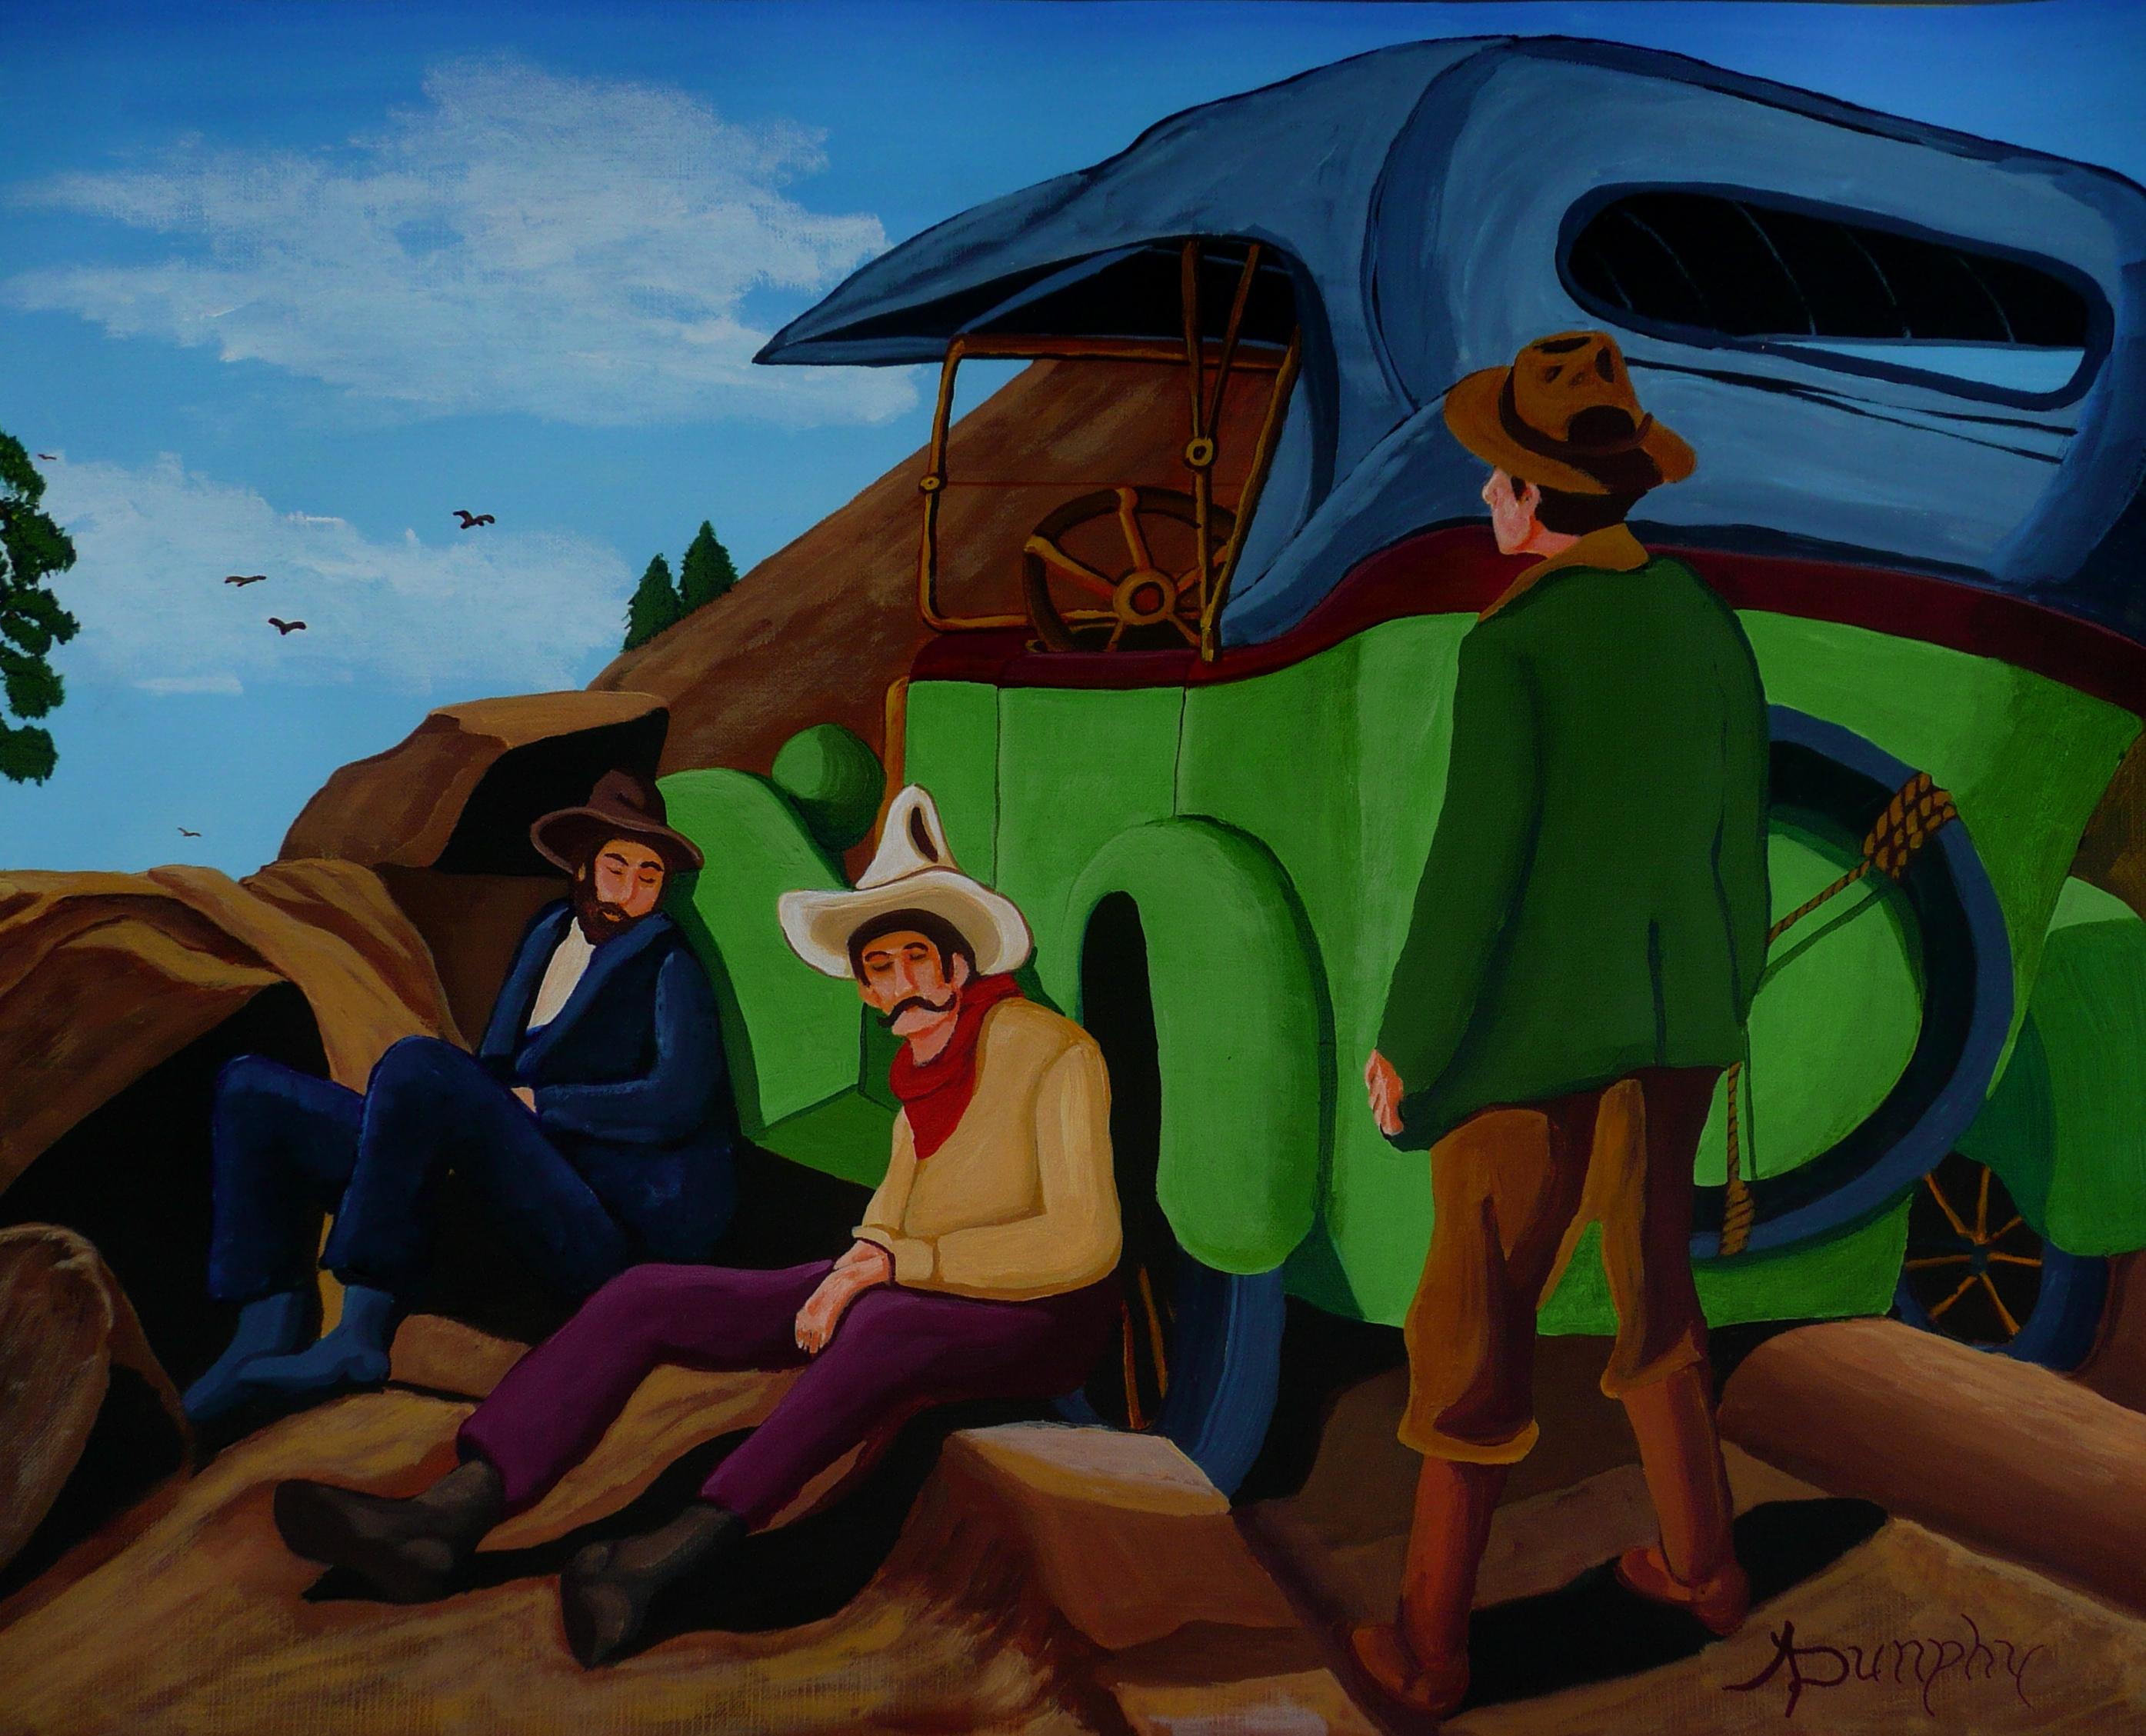 Three young adventurers are having a rest after climbing their Model T Ford to the top of a mountain.This painting was done on durable canvas paper and is 40X50 cms or 16X20 inches and is coated wityh a clear varnish to protect the surface from dust